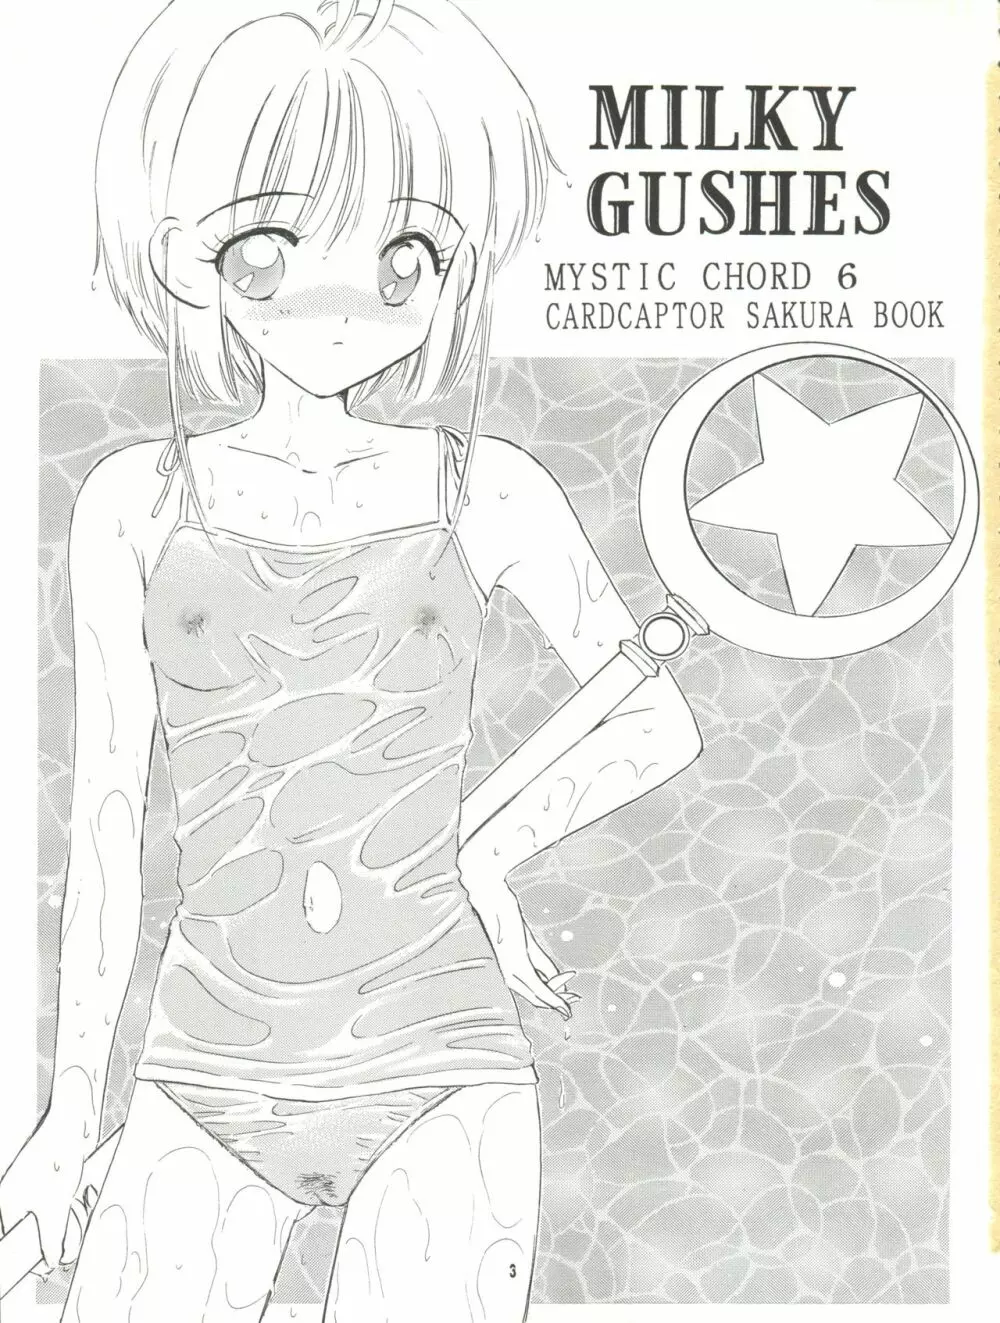 MILKY GUSHES 4ページ